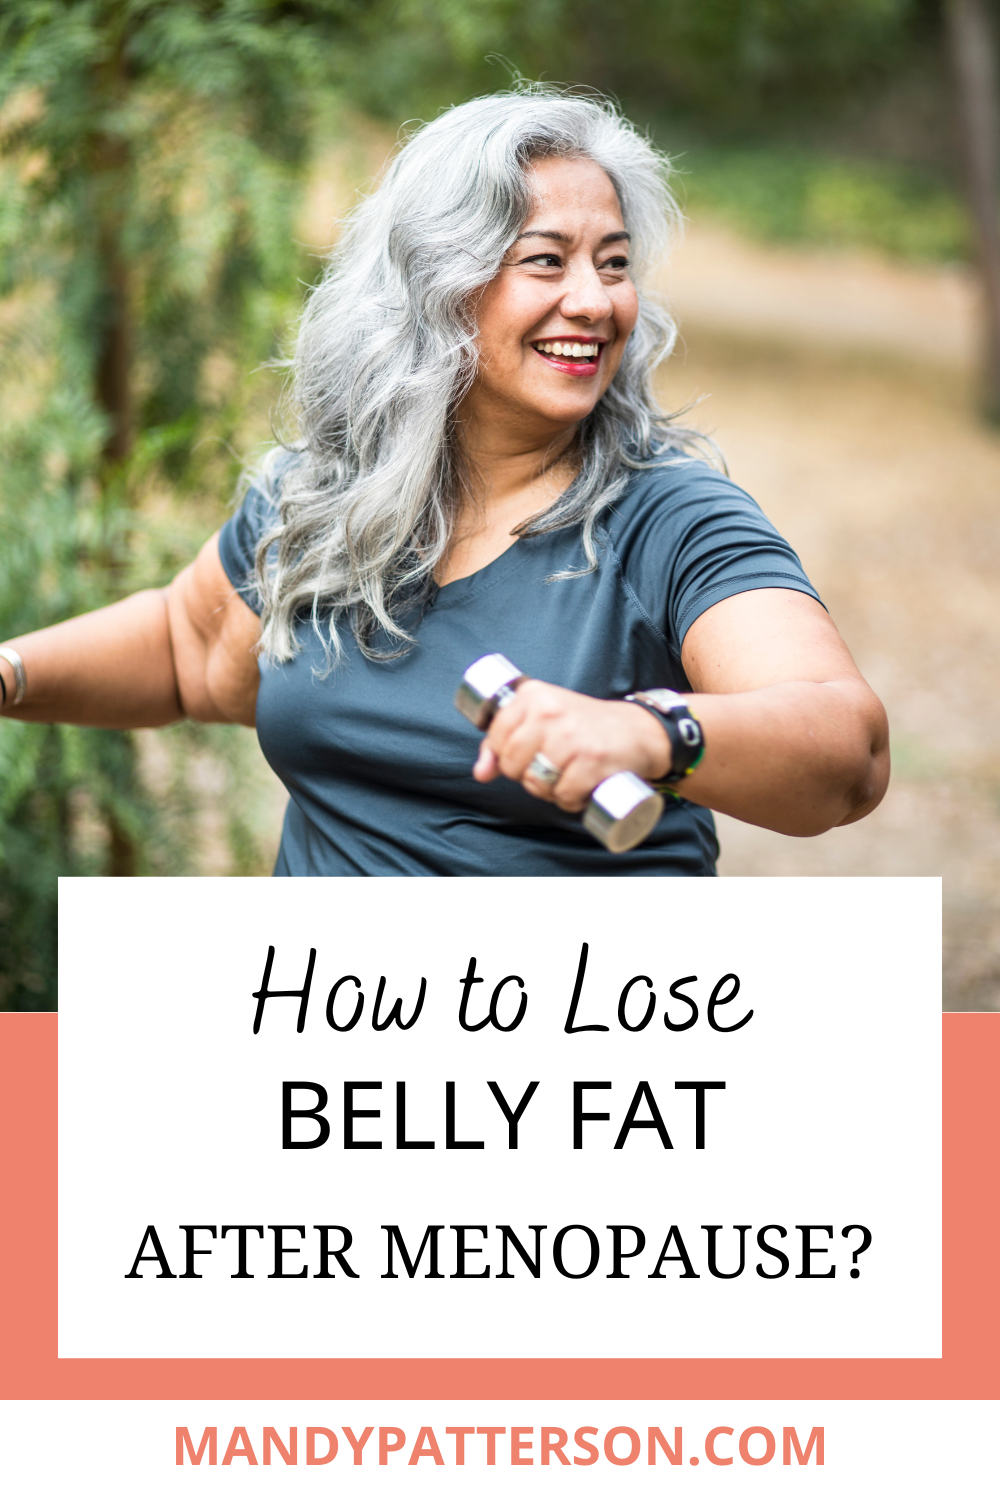 How to Lose Belly Fat After Menopause?